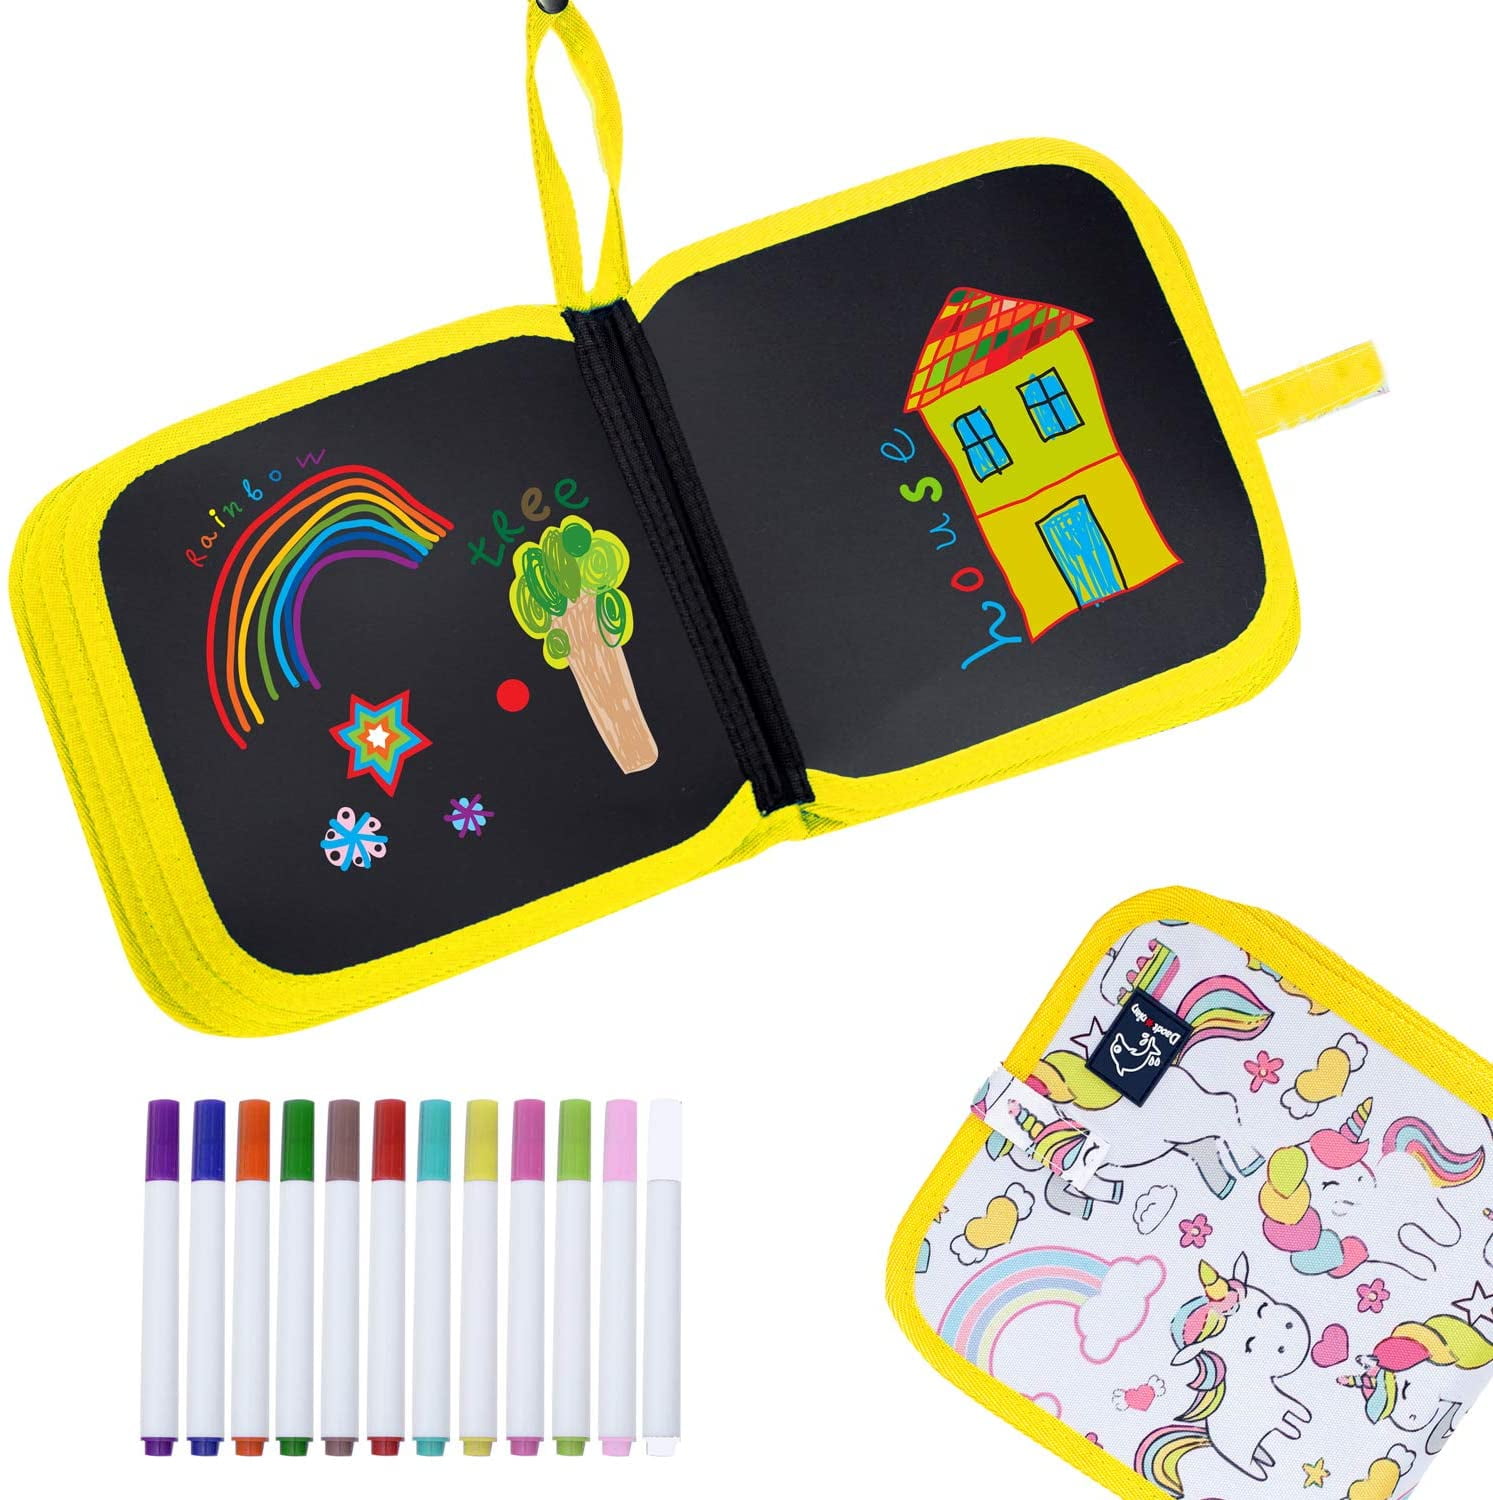 Details about   NEW Extra Large Magic Writer Magnetic Writing Pen Drawing Slate Board Doodle Pad 